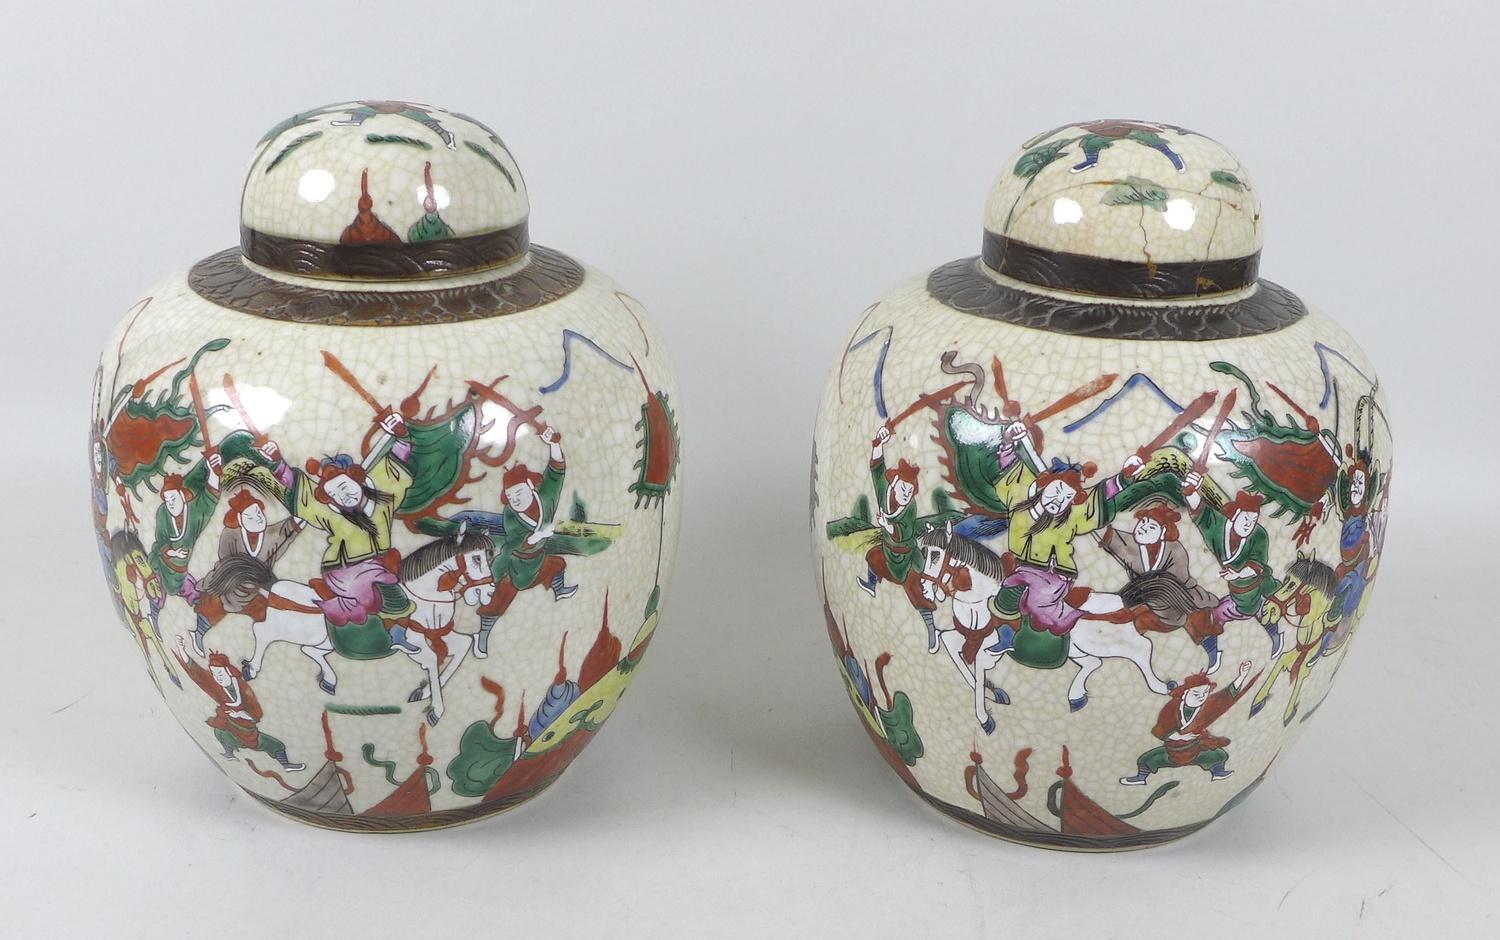 A pair of early 20th century Chinese porcelain ginger jars and covers, decorated as a mirrored pair,